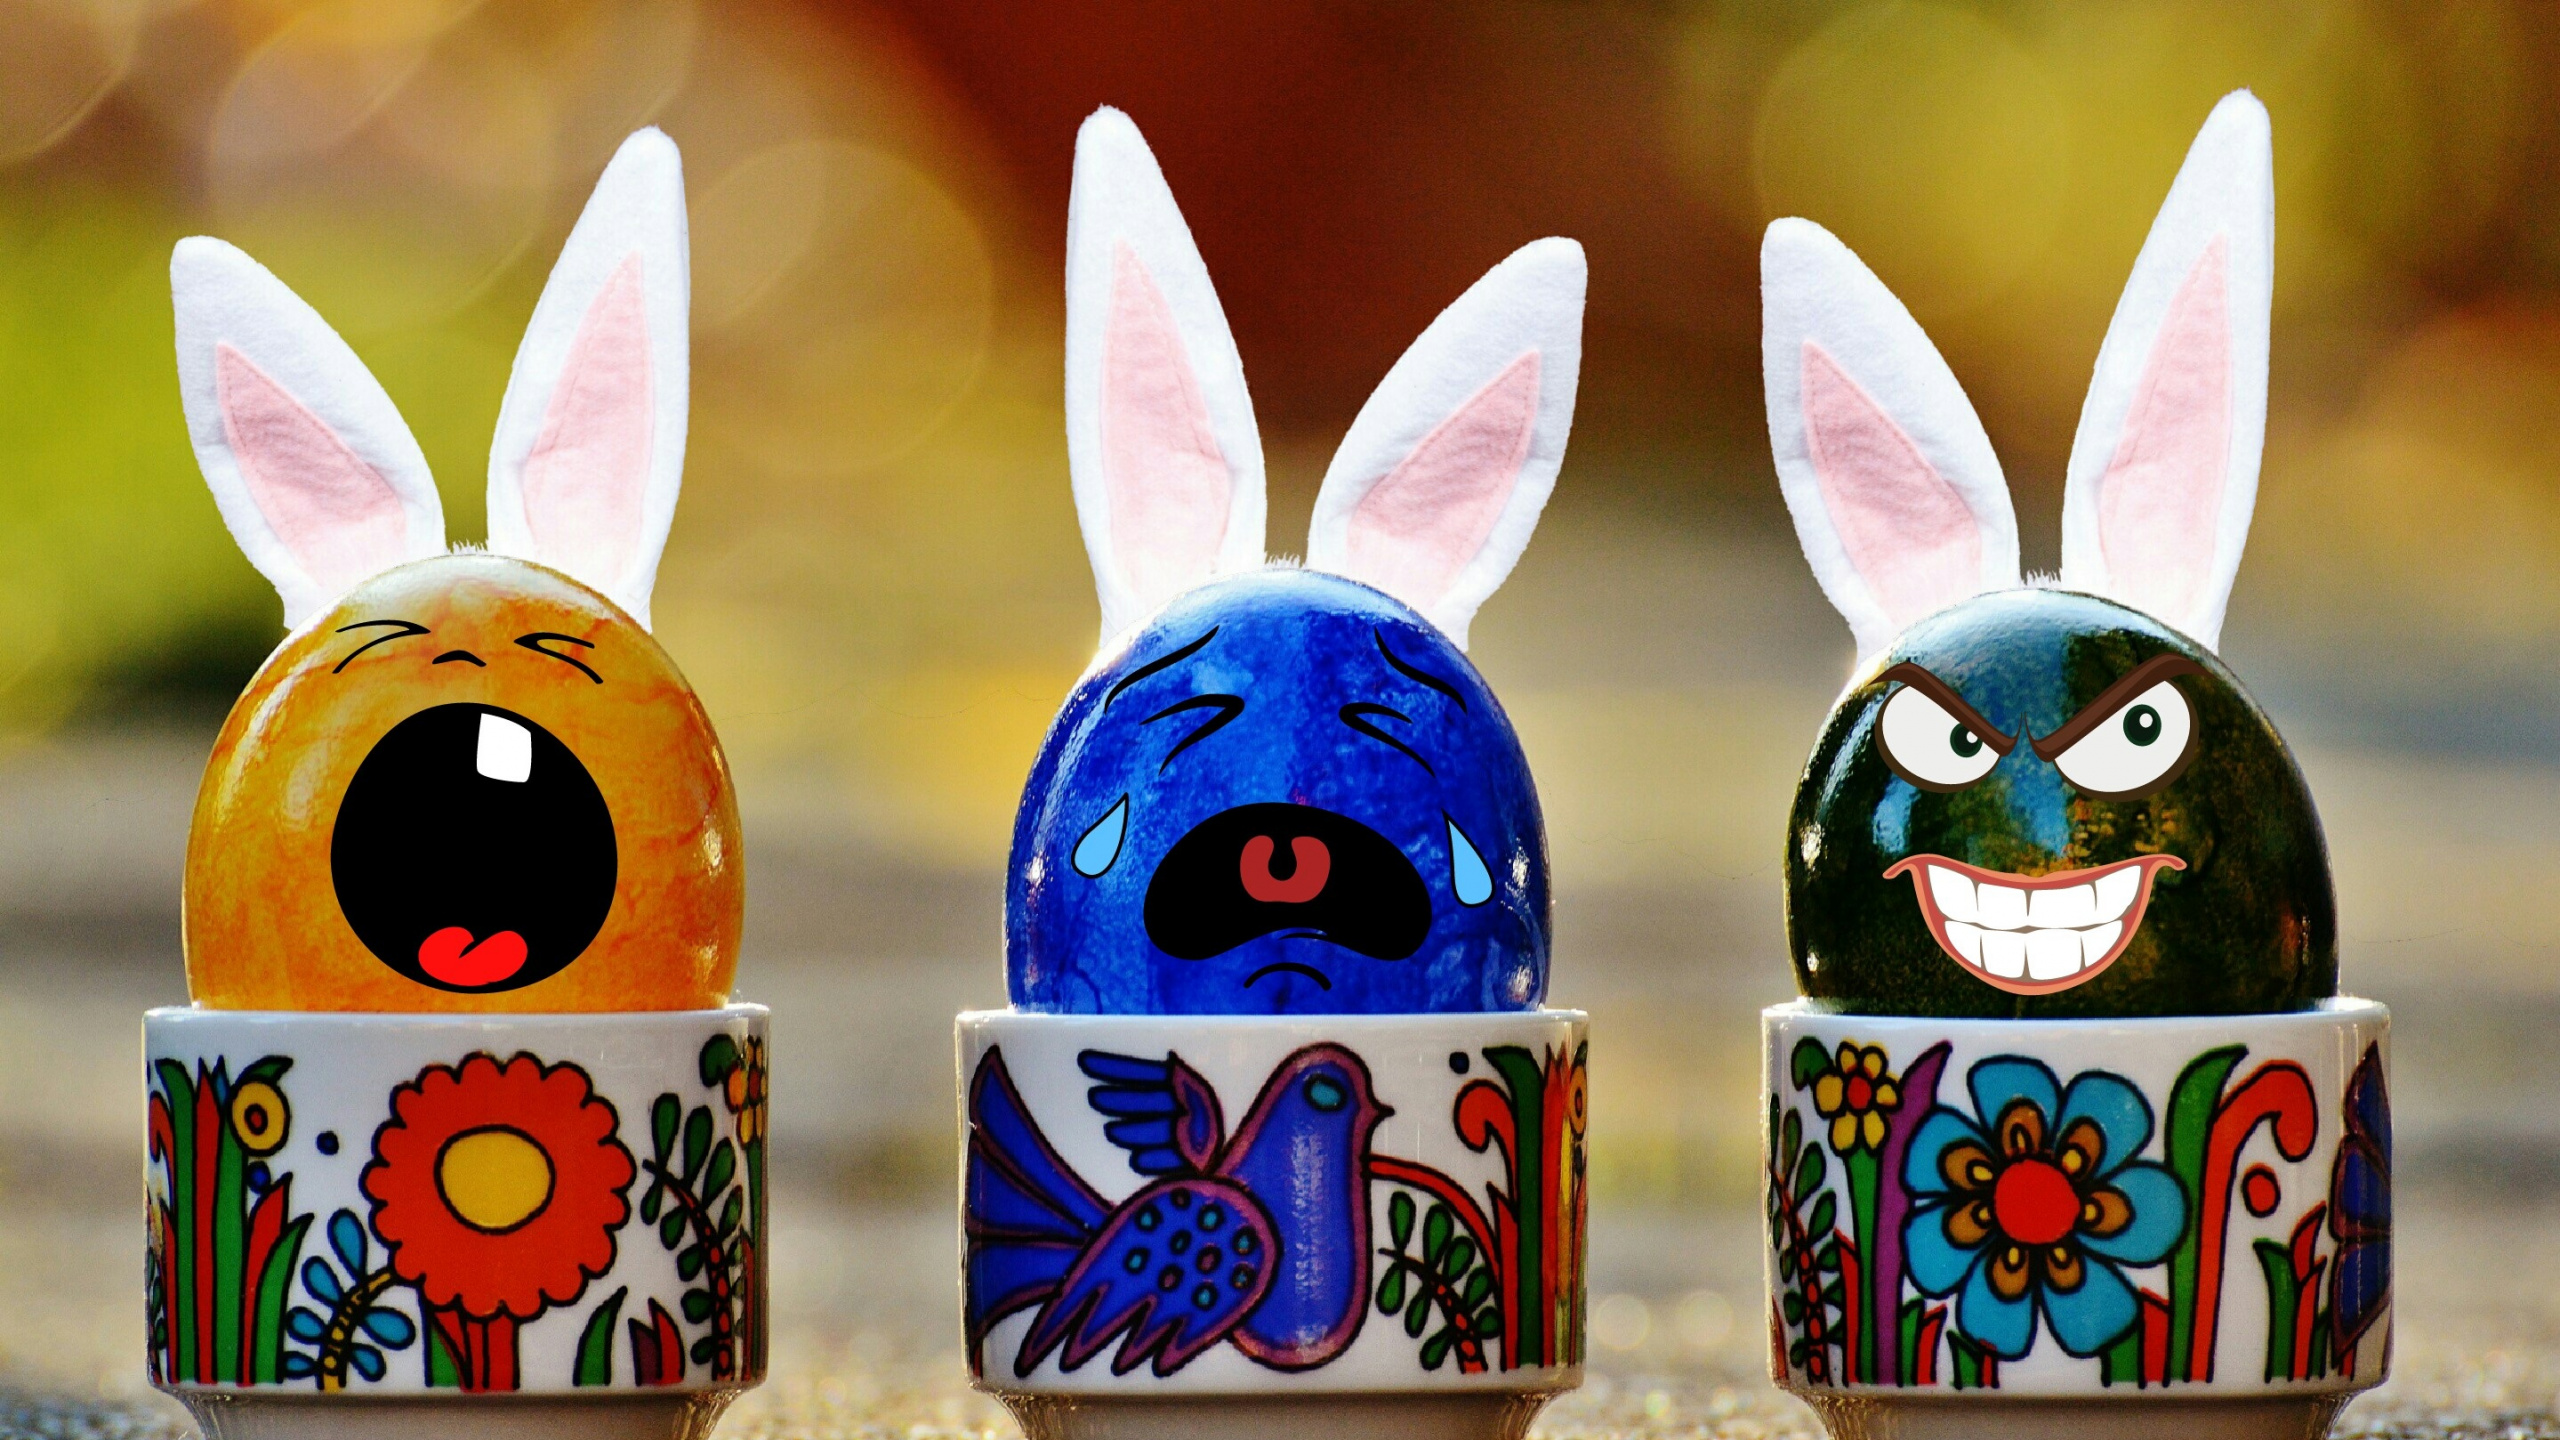 Easter Egg, Rabbit, Rabbits and Hares, Easter, Easter Bunny. Wallpaper in 2560x1440 Resolution